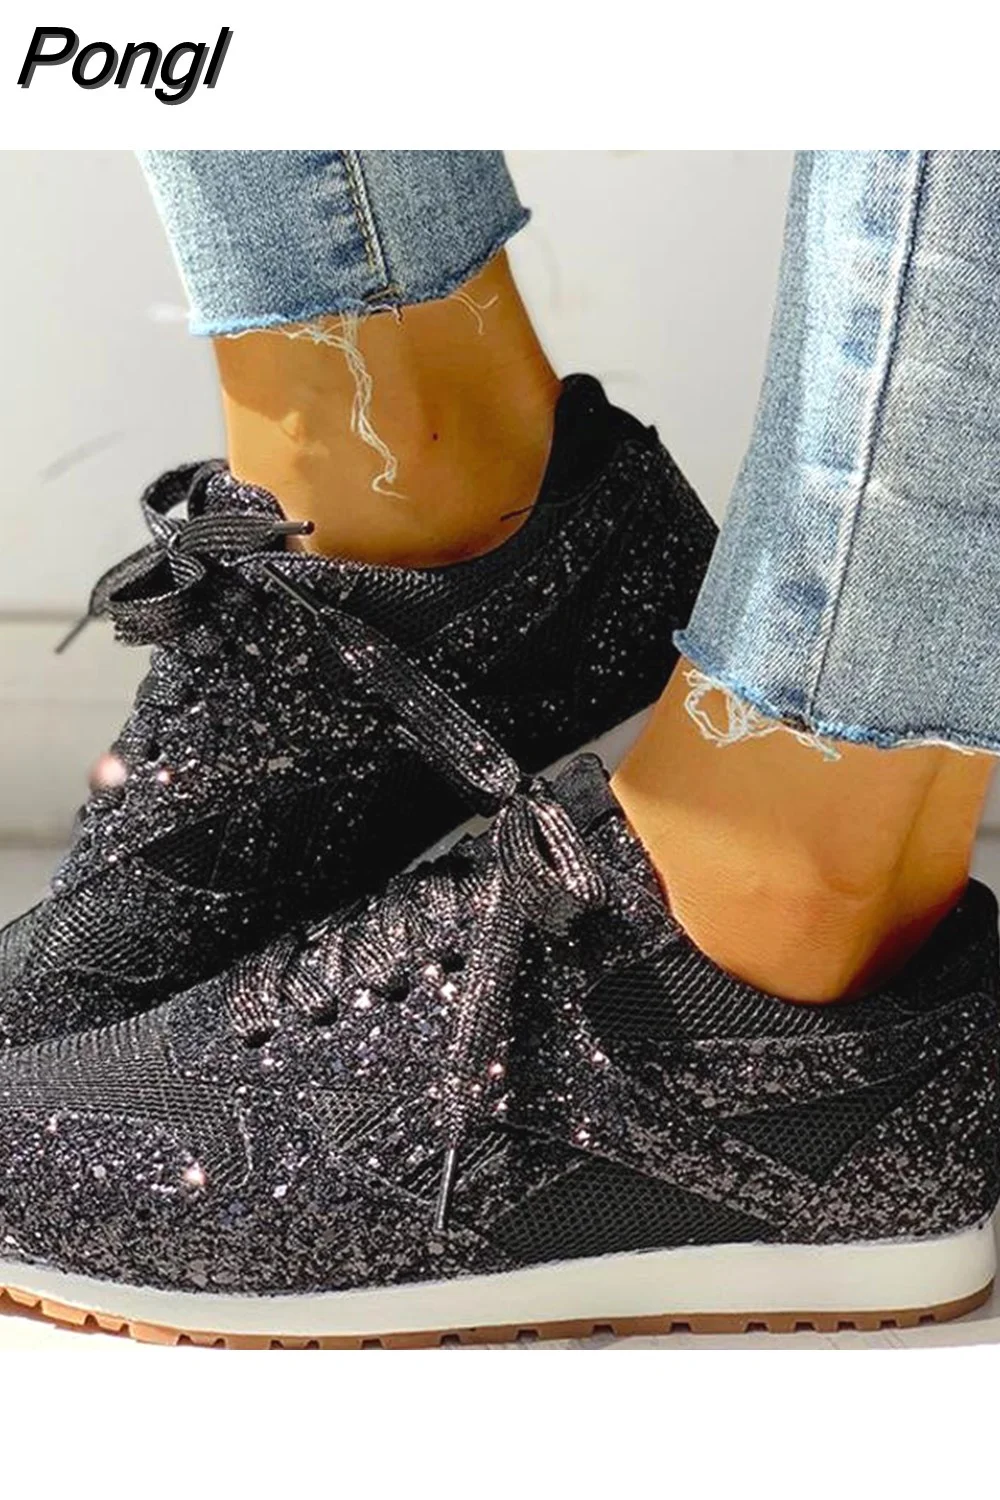 Pongl Flat Glitter Sneakers Casual Female Mesh Lace Up Bling Platform Comfortable Plus Size Vulcanized Shoes 2023 Soft Knitting 405-1